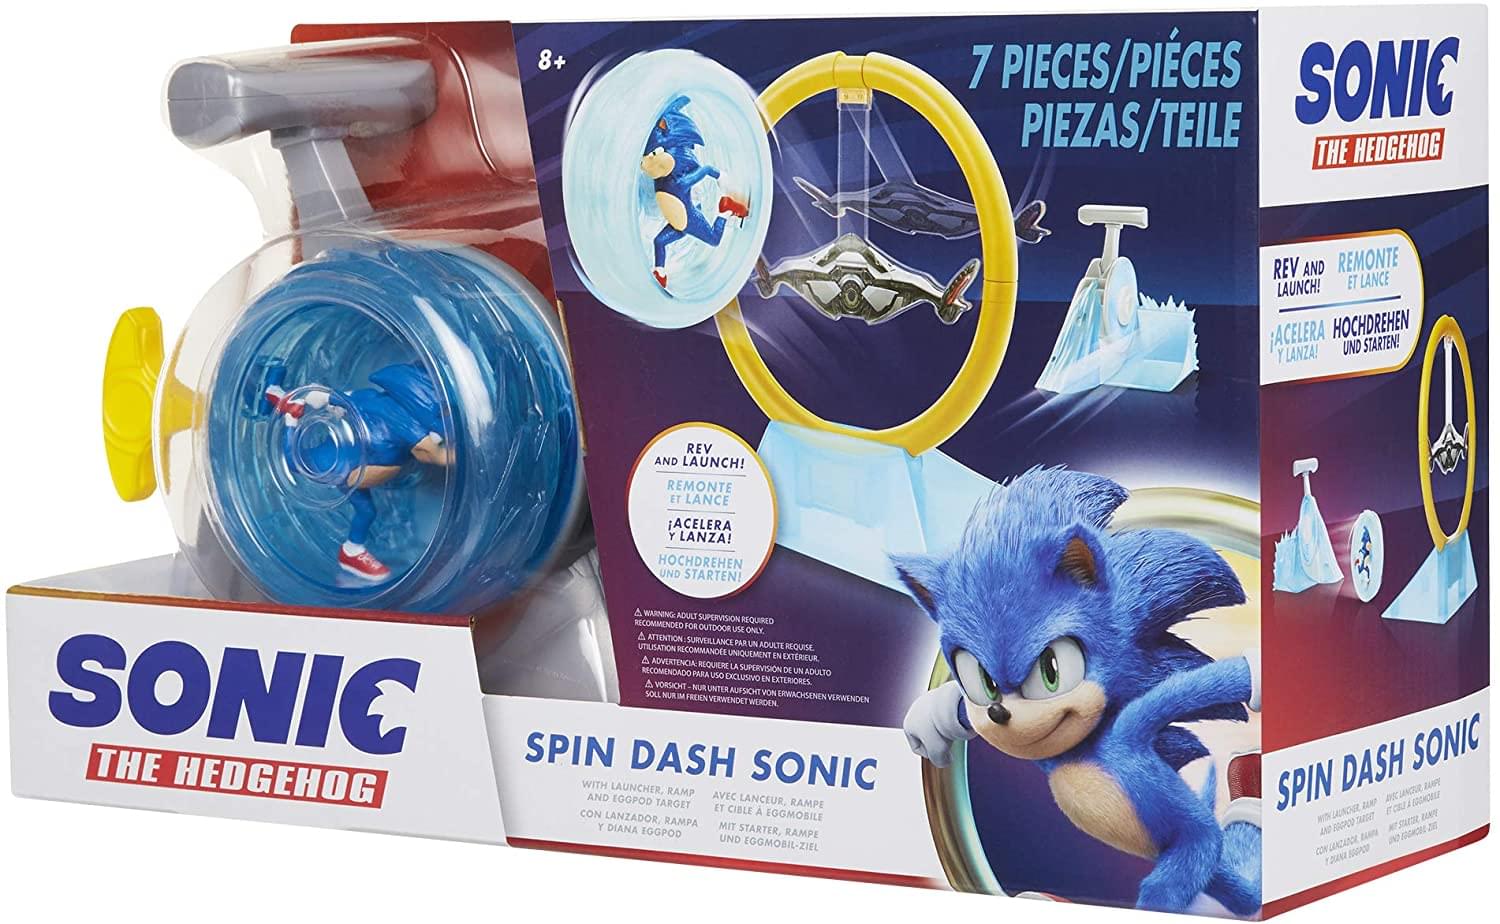 Sonic The Hedgehog Spin Dash Sonic Rev and Launch Toy Free Shipping